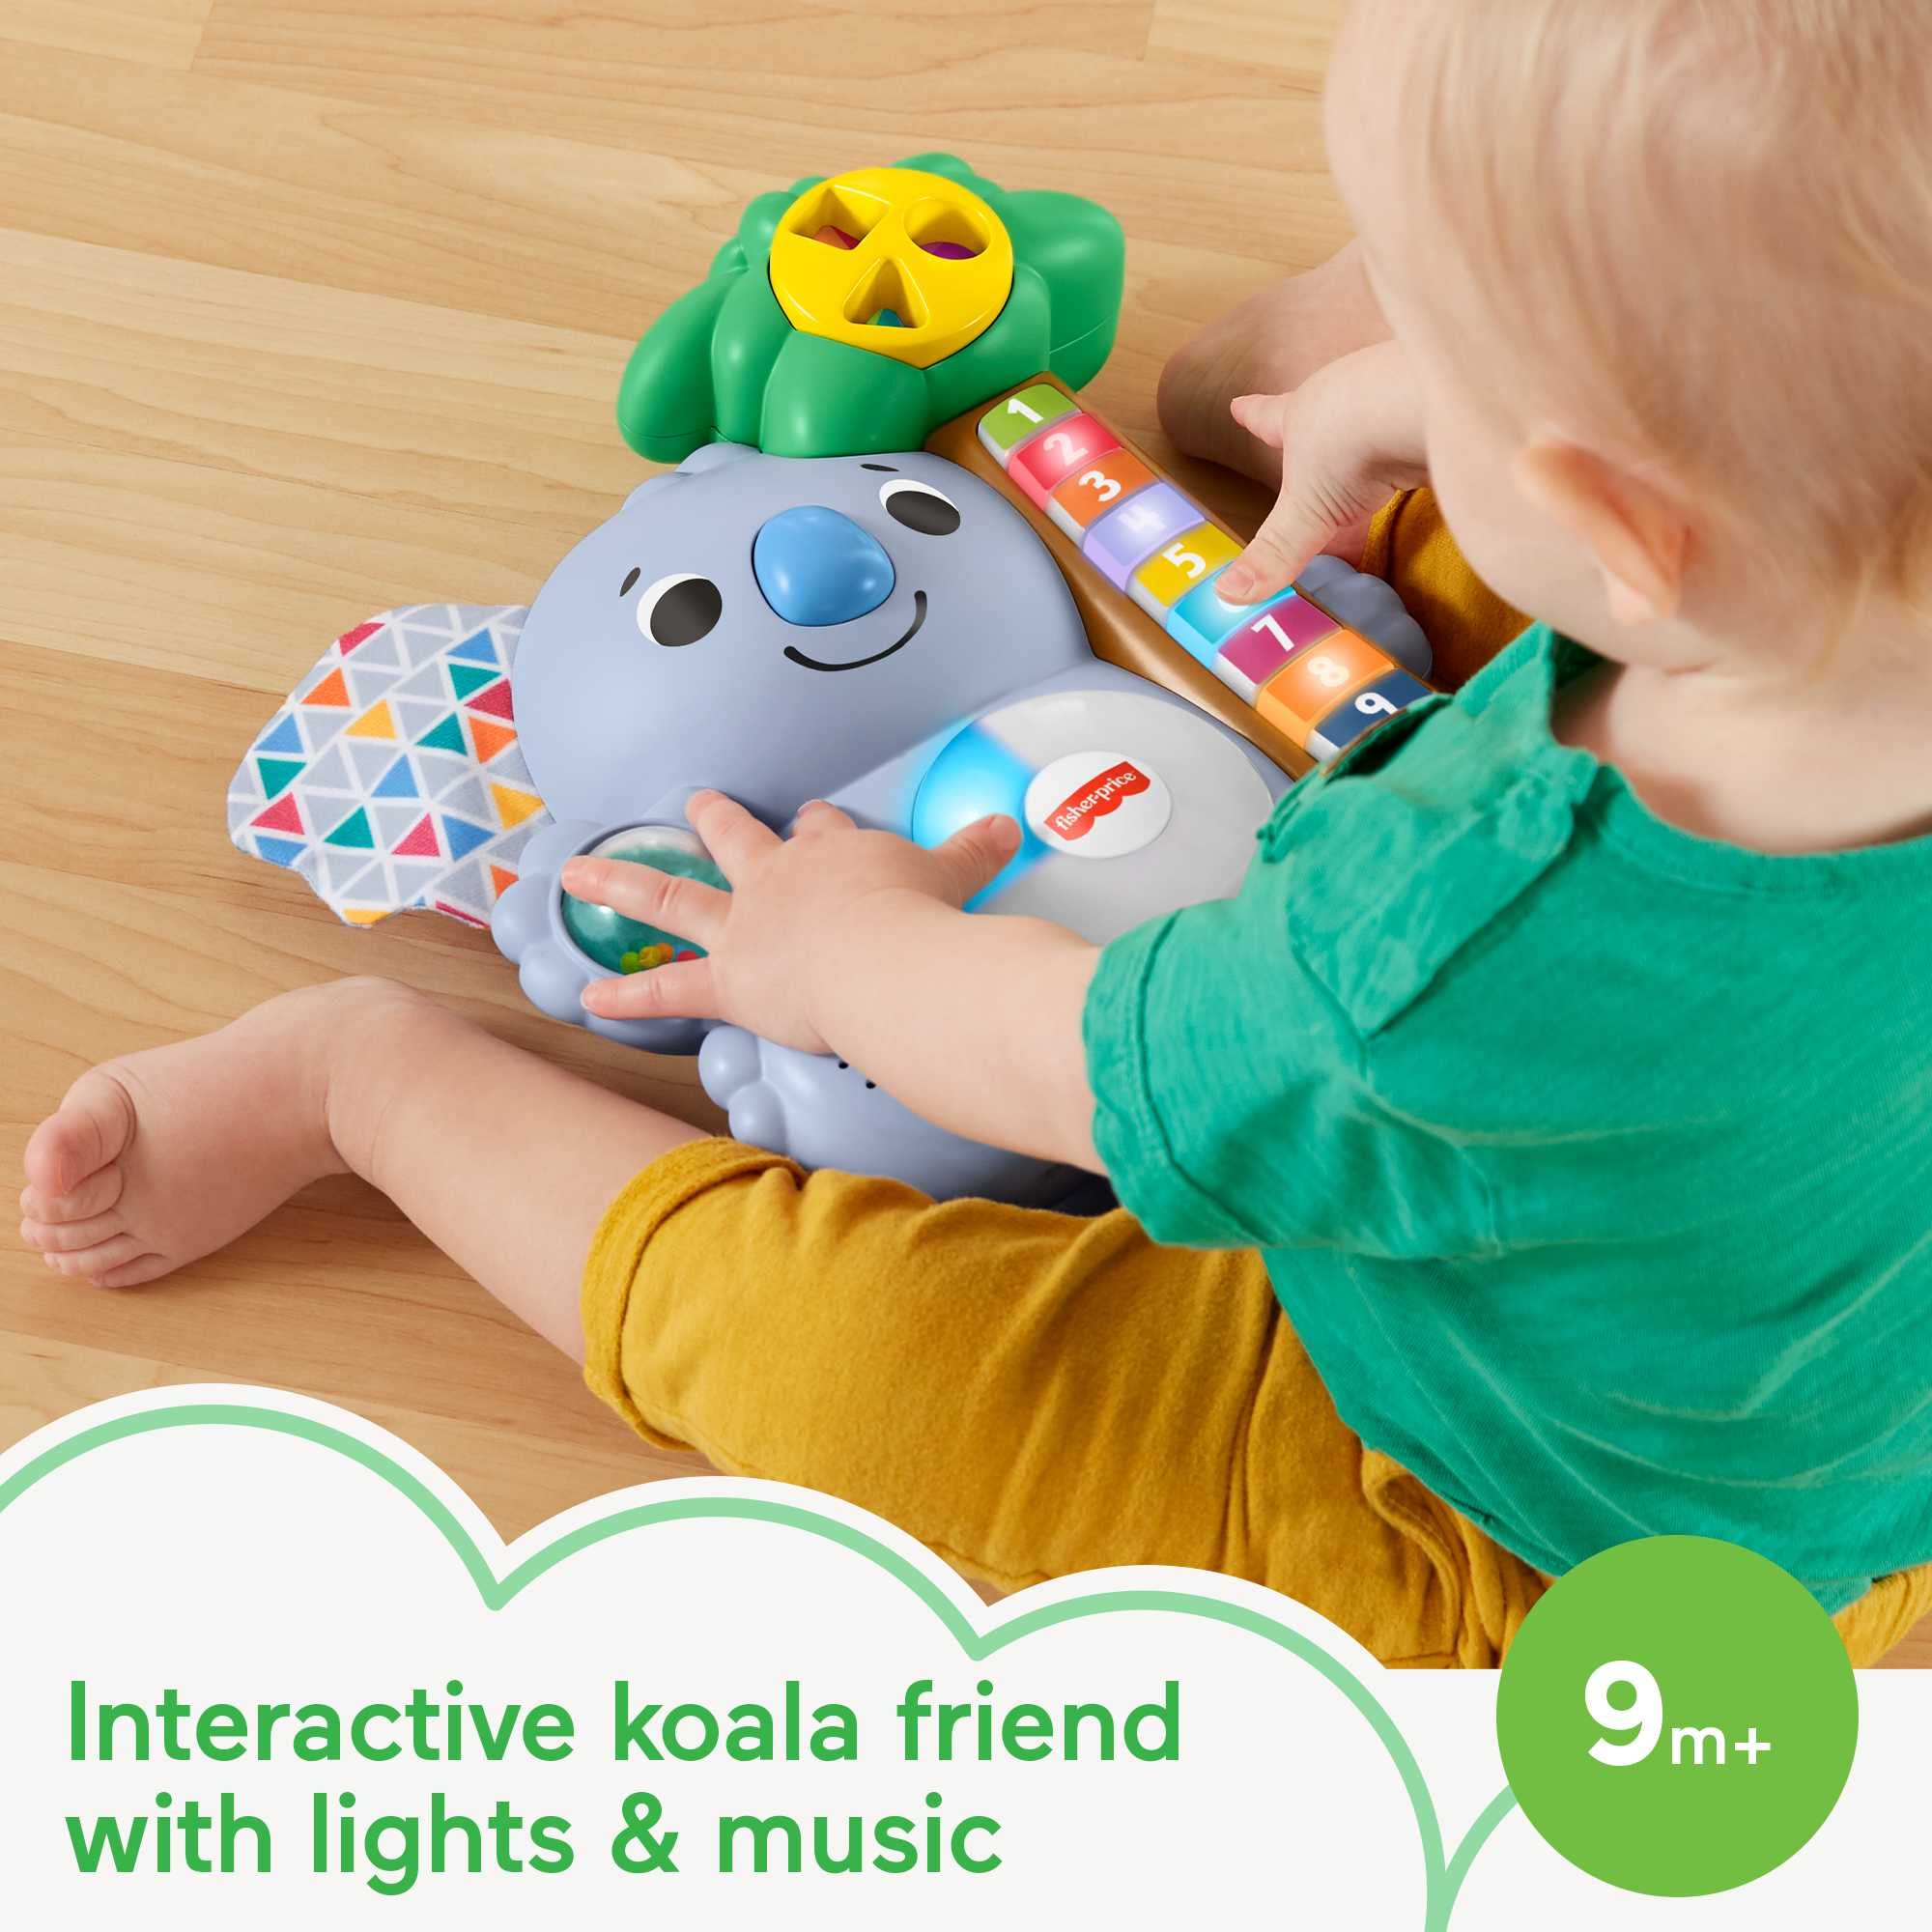 Fisher-Price Linkimals Koala Baby Learning Counting Toy w/ Interactive Lights & Music $12.50 + Free Shipping w/ Prime or on $35+